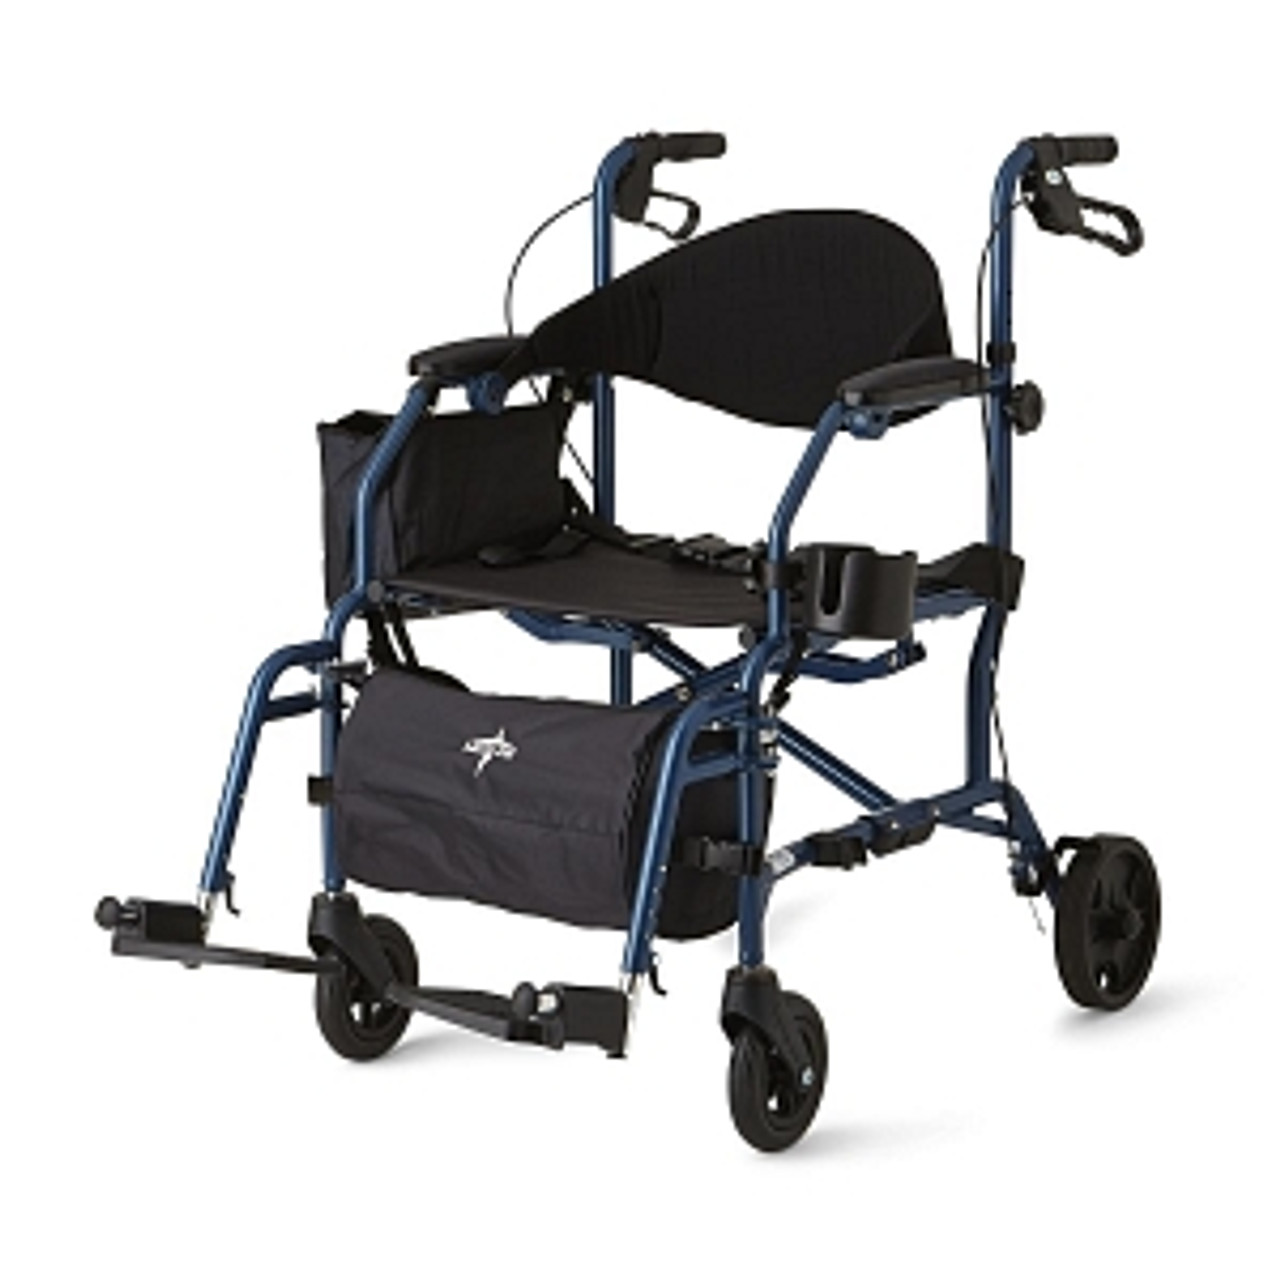 Quickly and easily converts from a rollator to a transport chair and vice-versa
Includes easy-to-adjust, push-button, swingaway footrests that lock to sides of rollator when not in use, height-adjustable push grips and comfortable hand brake
Breathable nylon upholstery, restaurant-style permanent armrests, roomy under-seat basket and strong carrying handles
Convenient, side-carrying case and cup holder
Seat size 19" x 16" (48 x 41 cm)